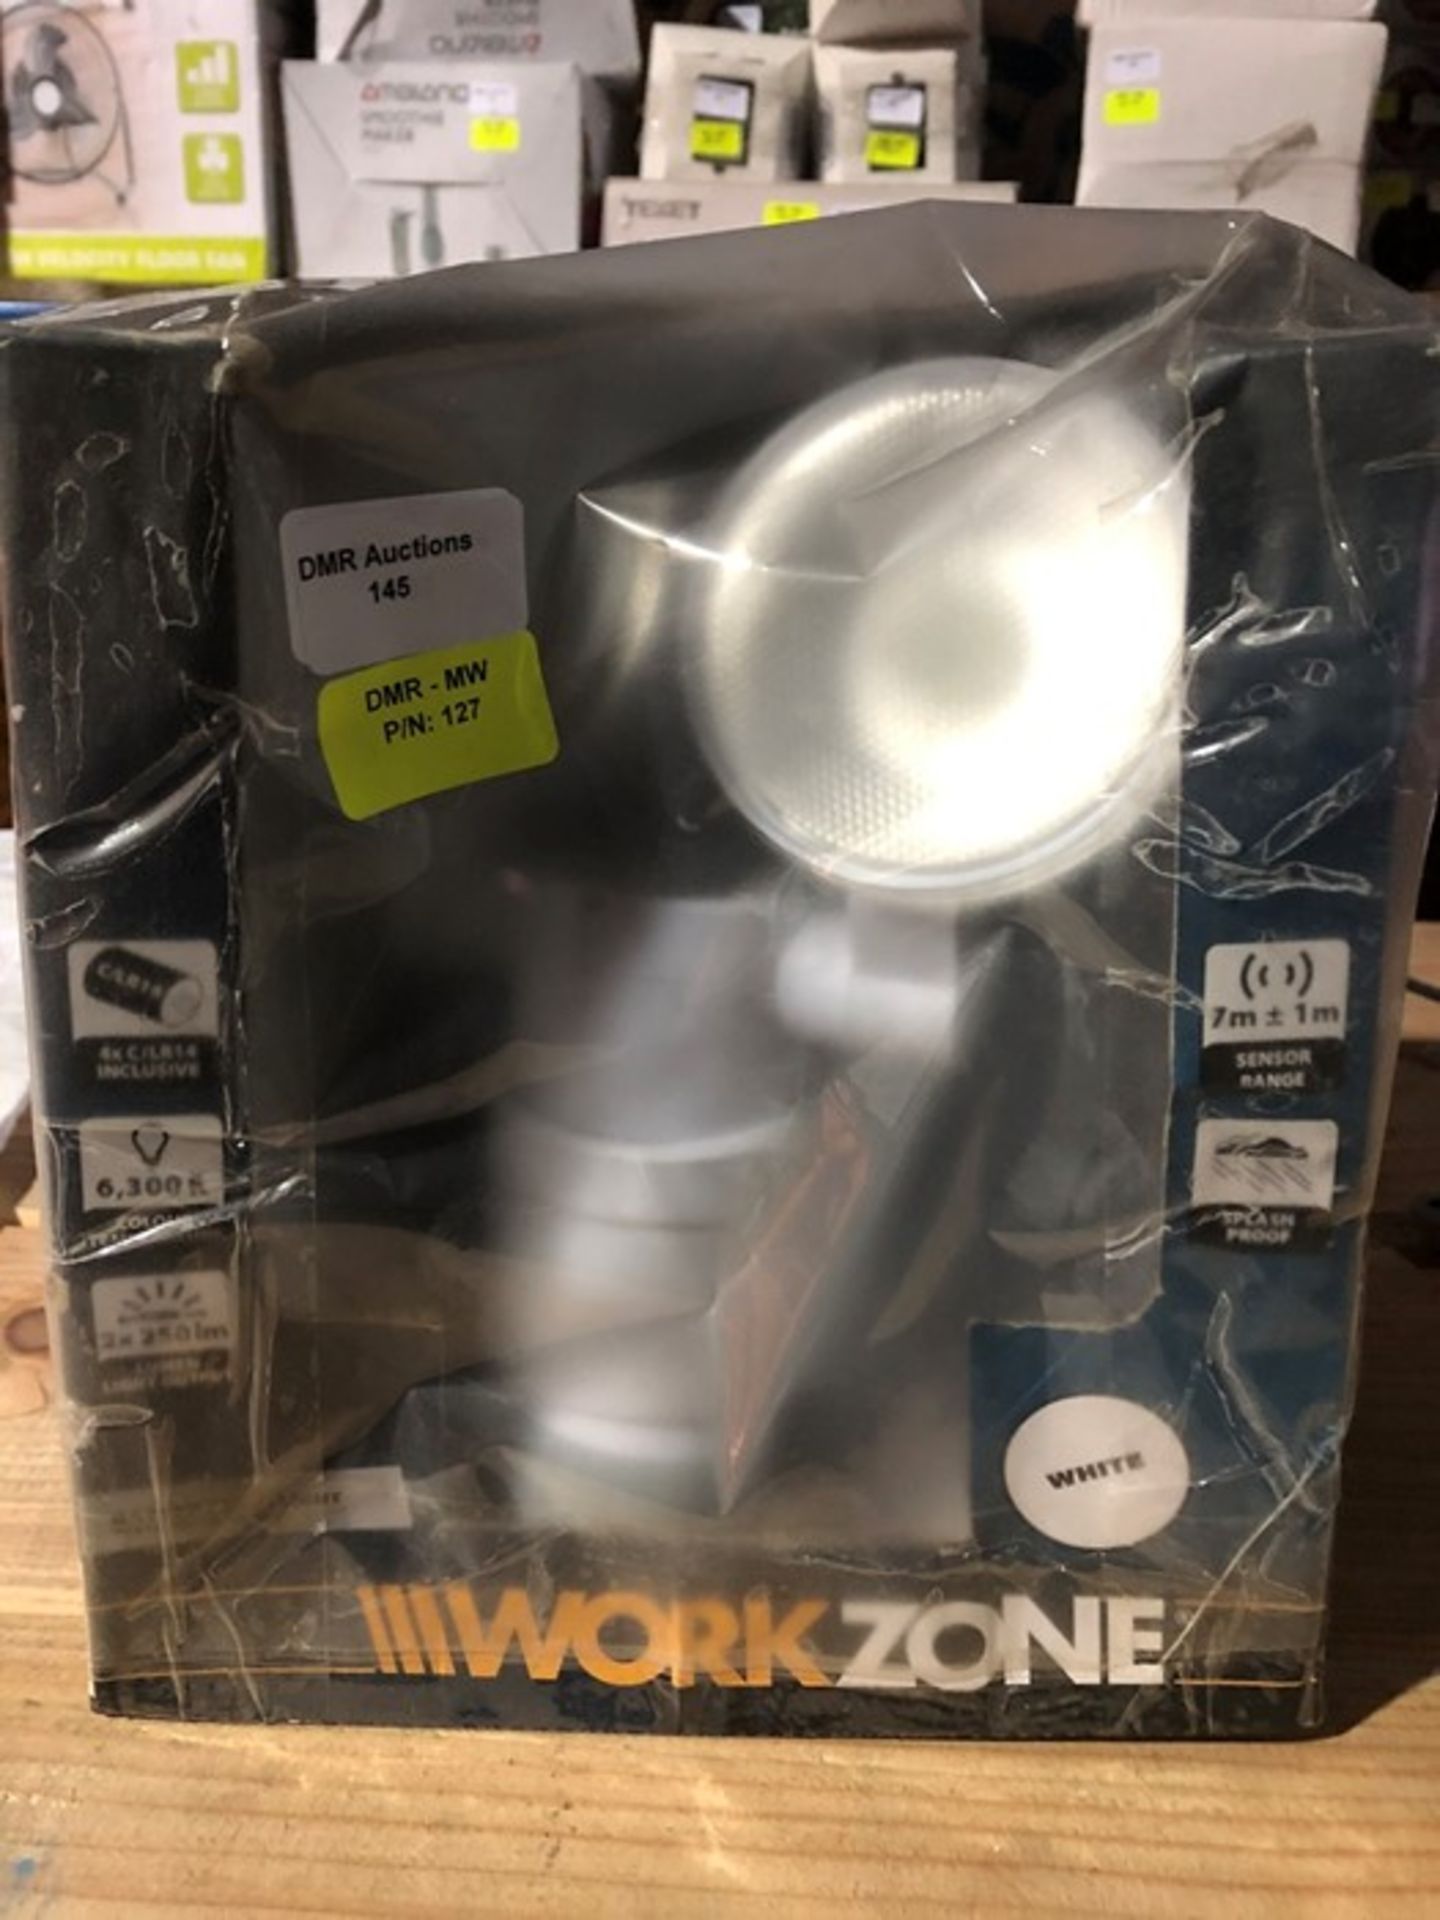 1 BOXED WORKZONE BATTERY SPOTLIGHT / RRP £34.99 (PUBLIC VIEWING AVAILABLE)